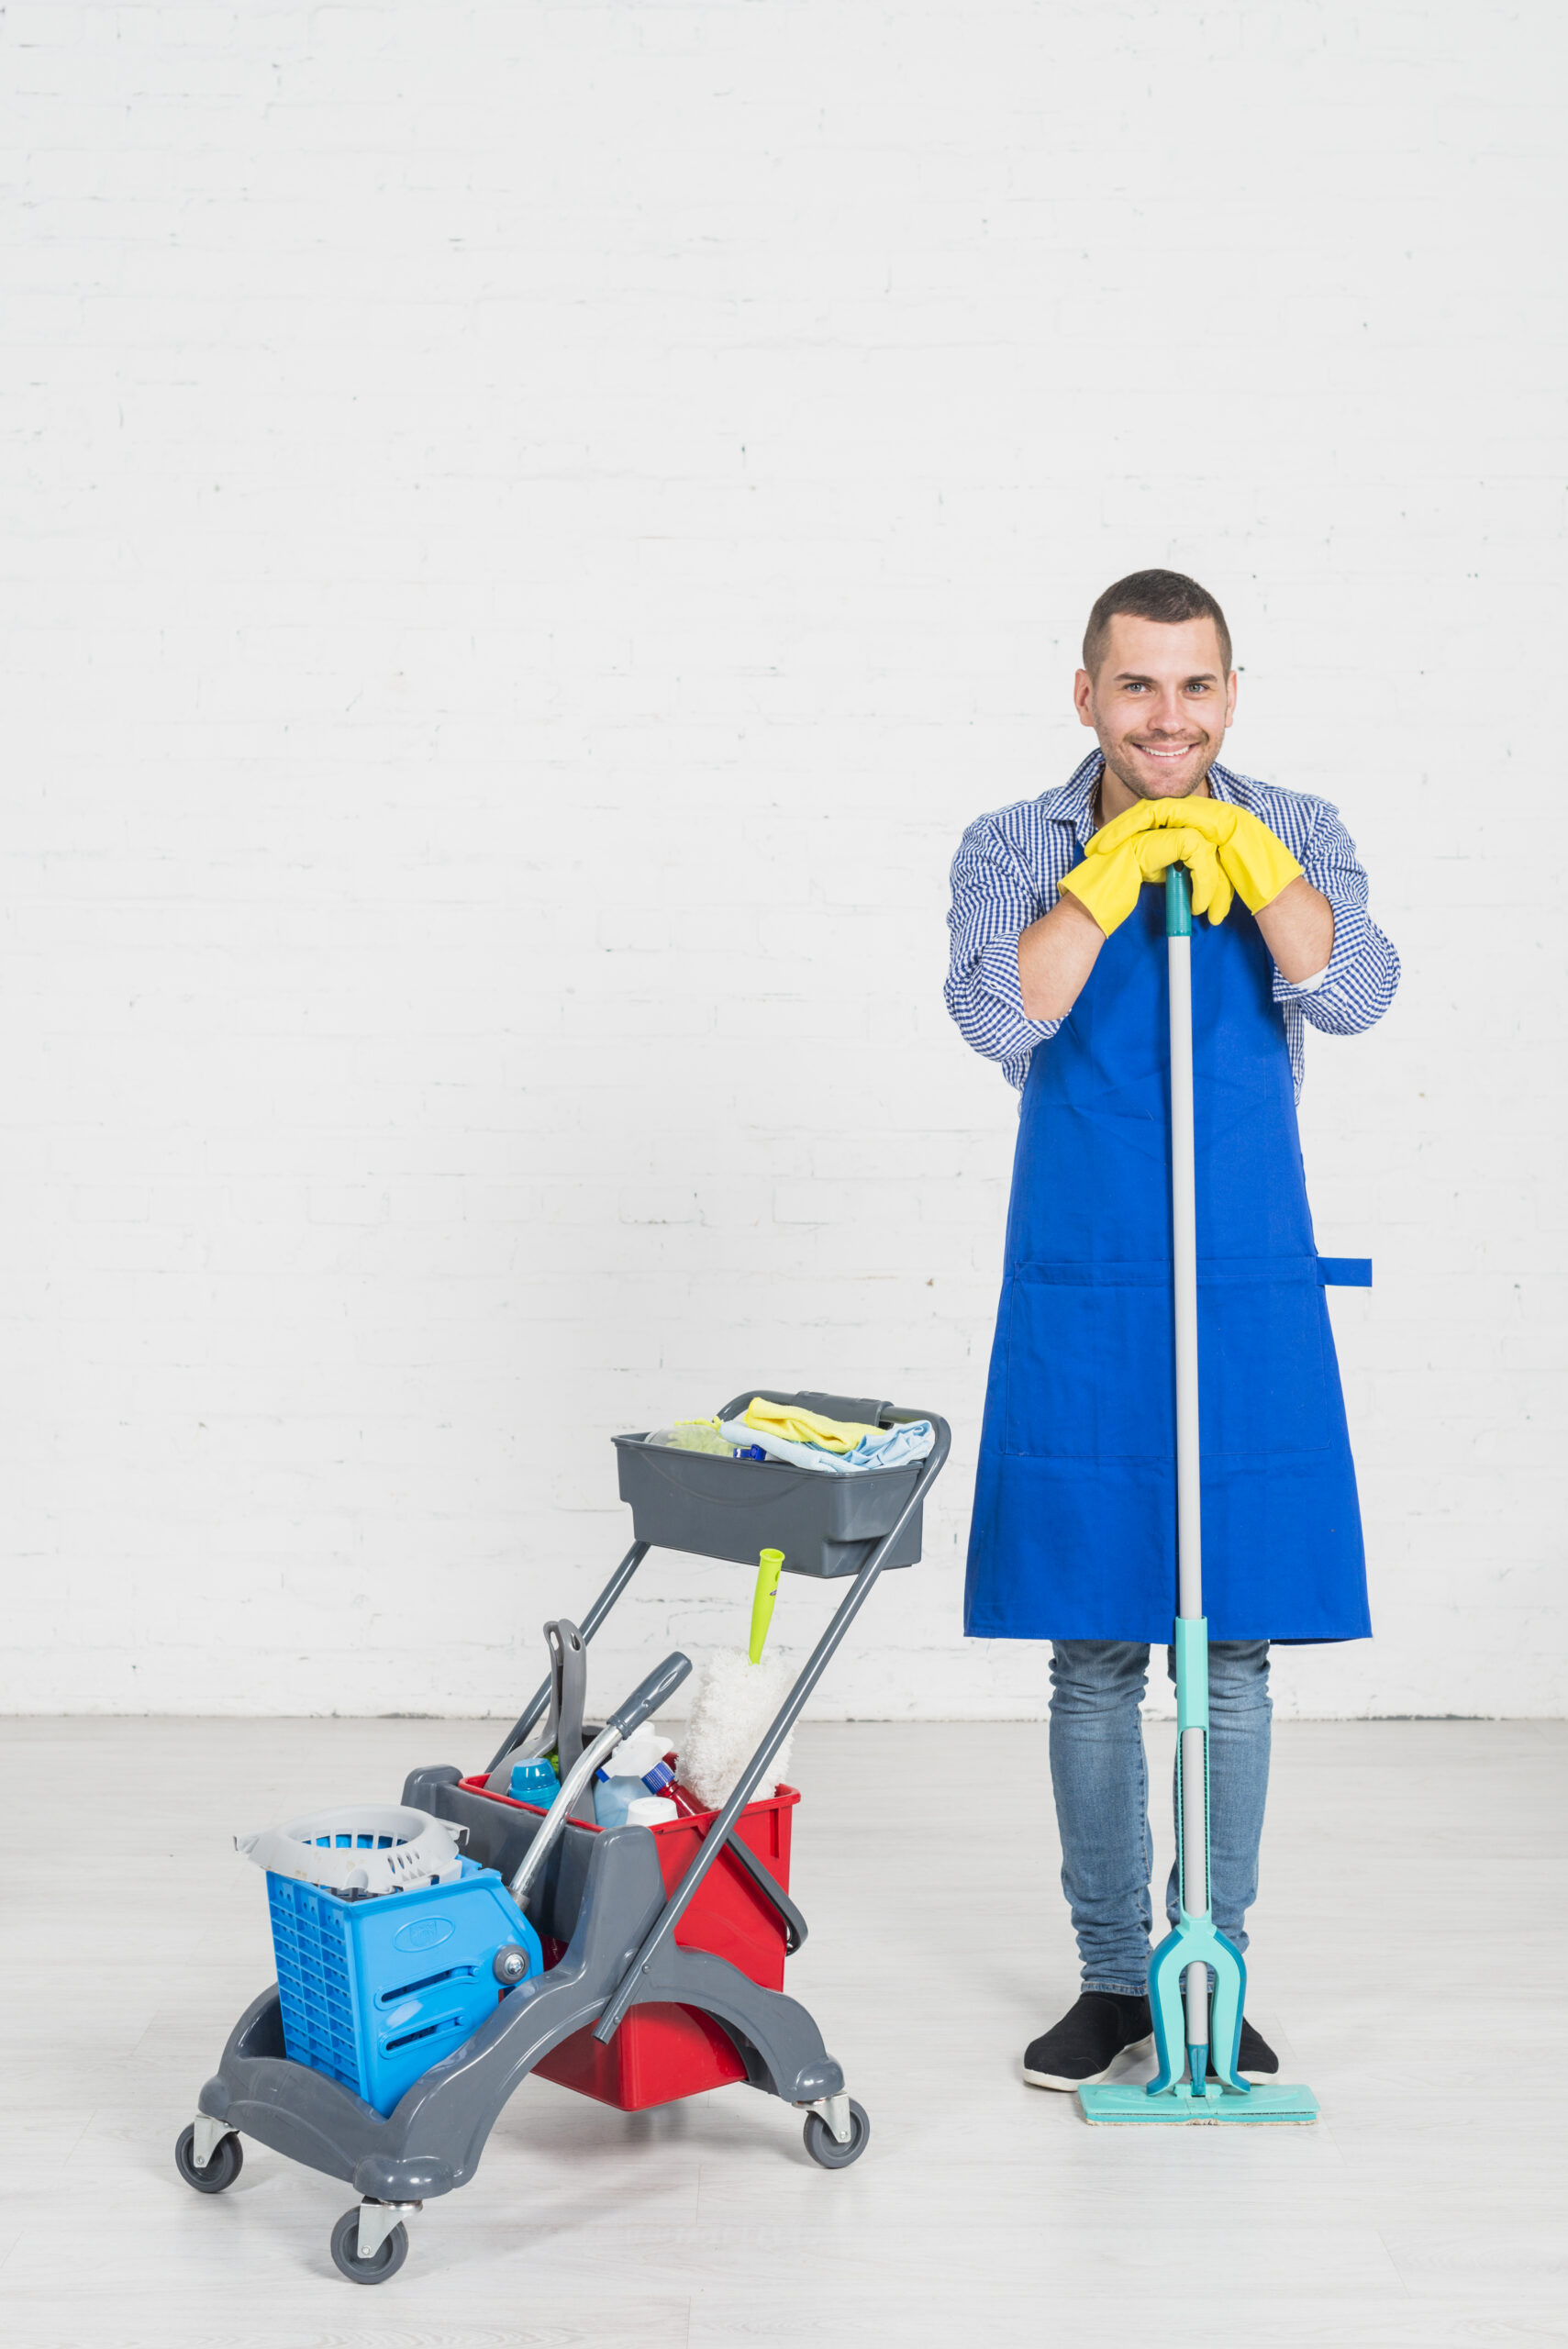 man-cleaning-his-home